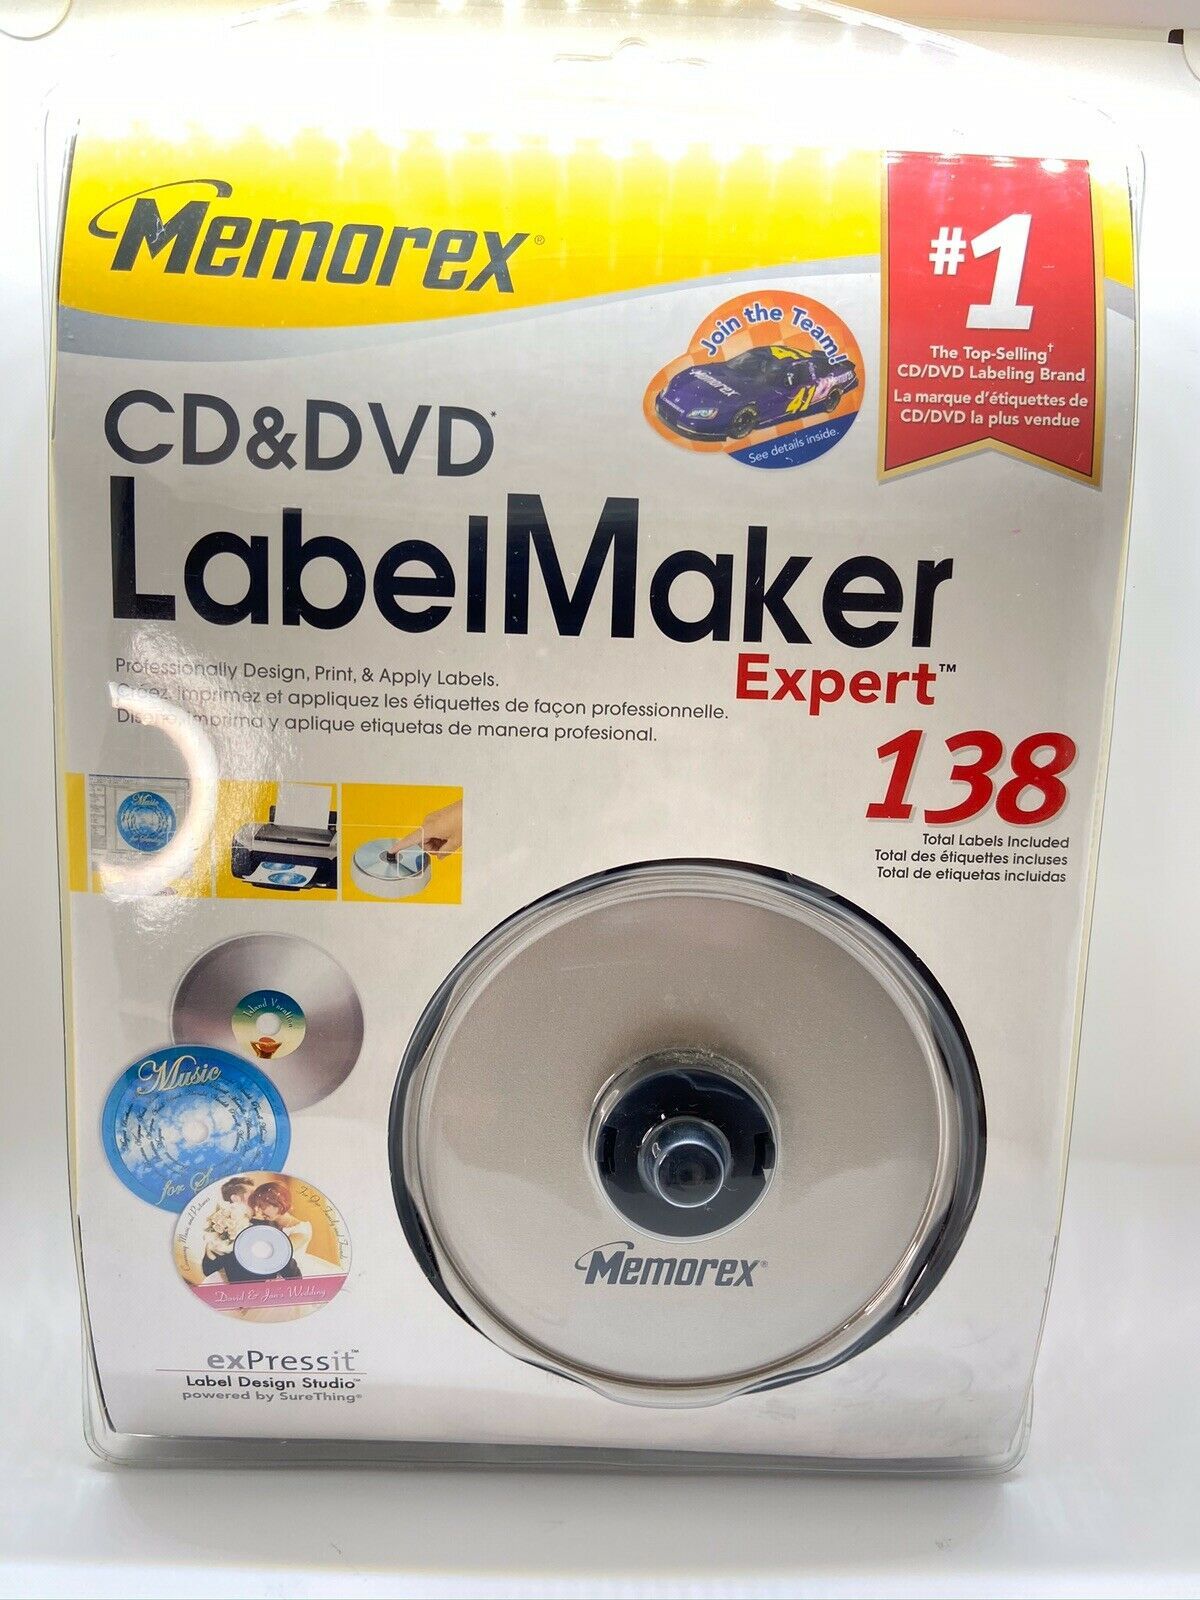 print to memorex cd labels with nero